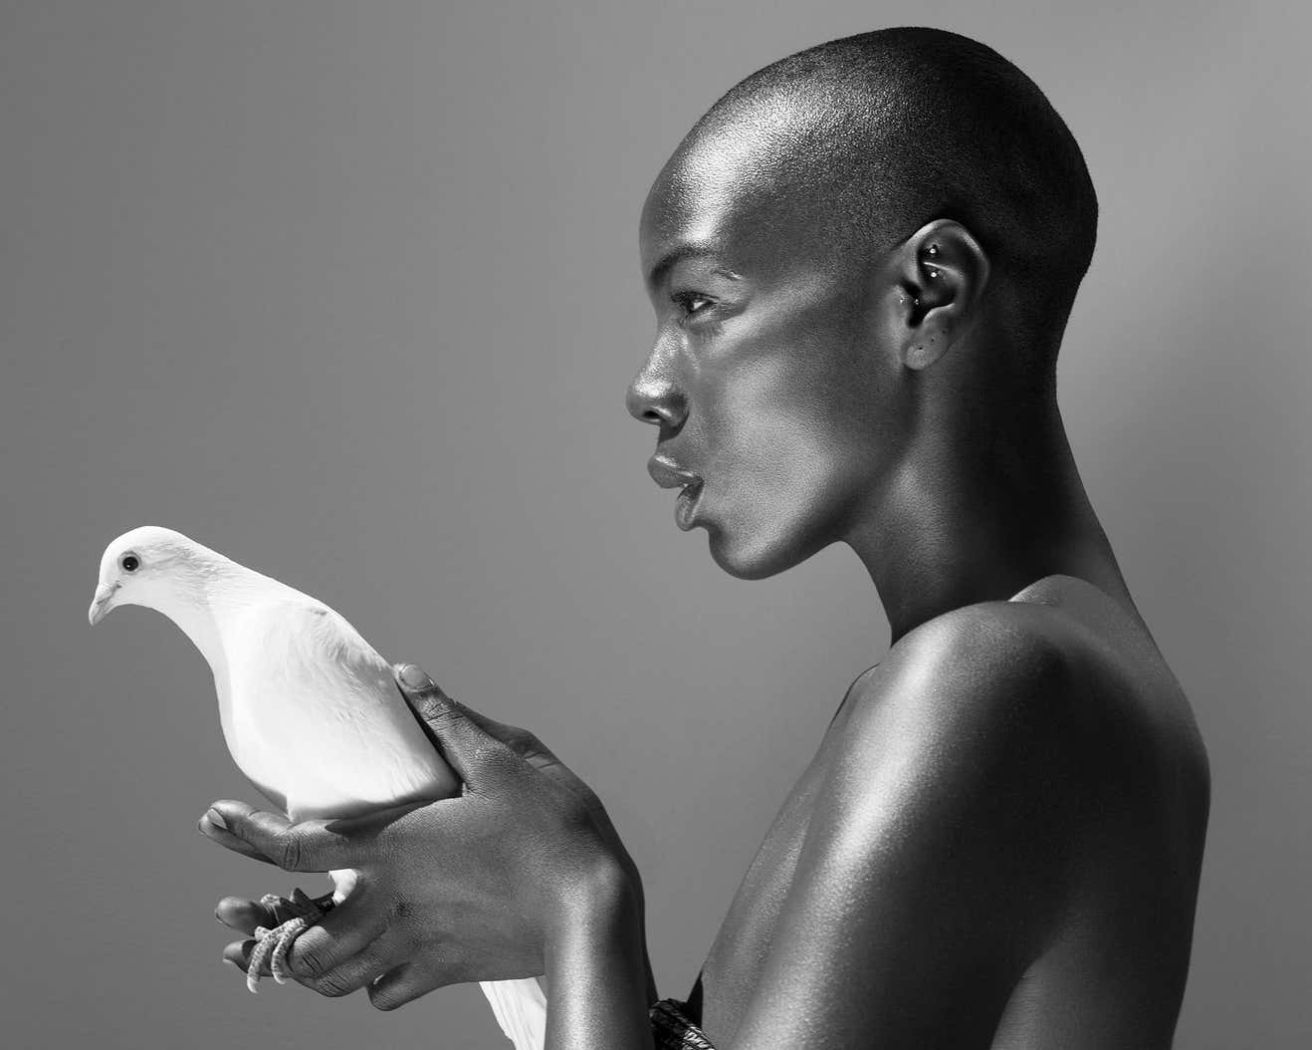 The pigeon by Sylvie Blum, bald model holding a white pigeon